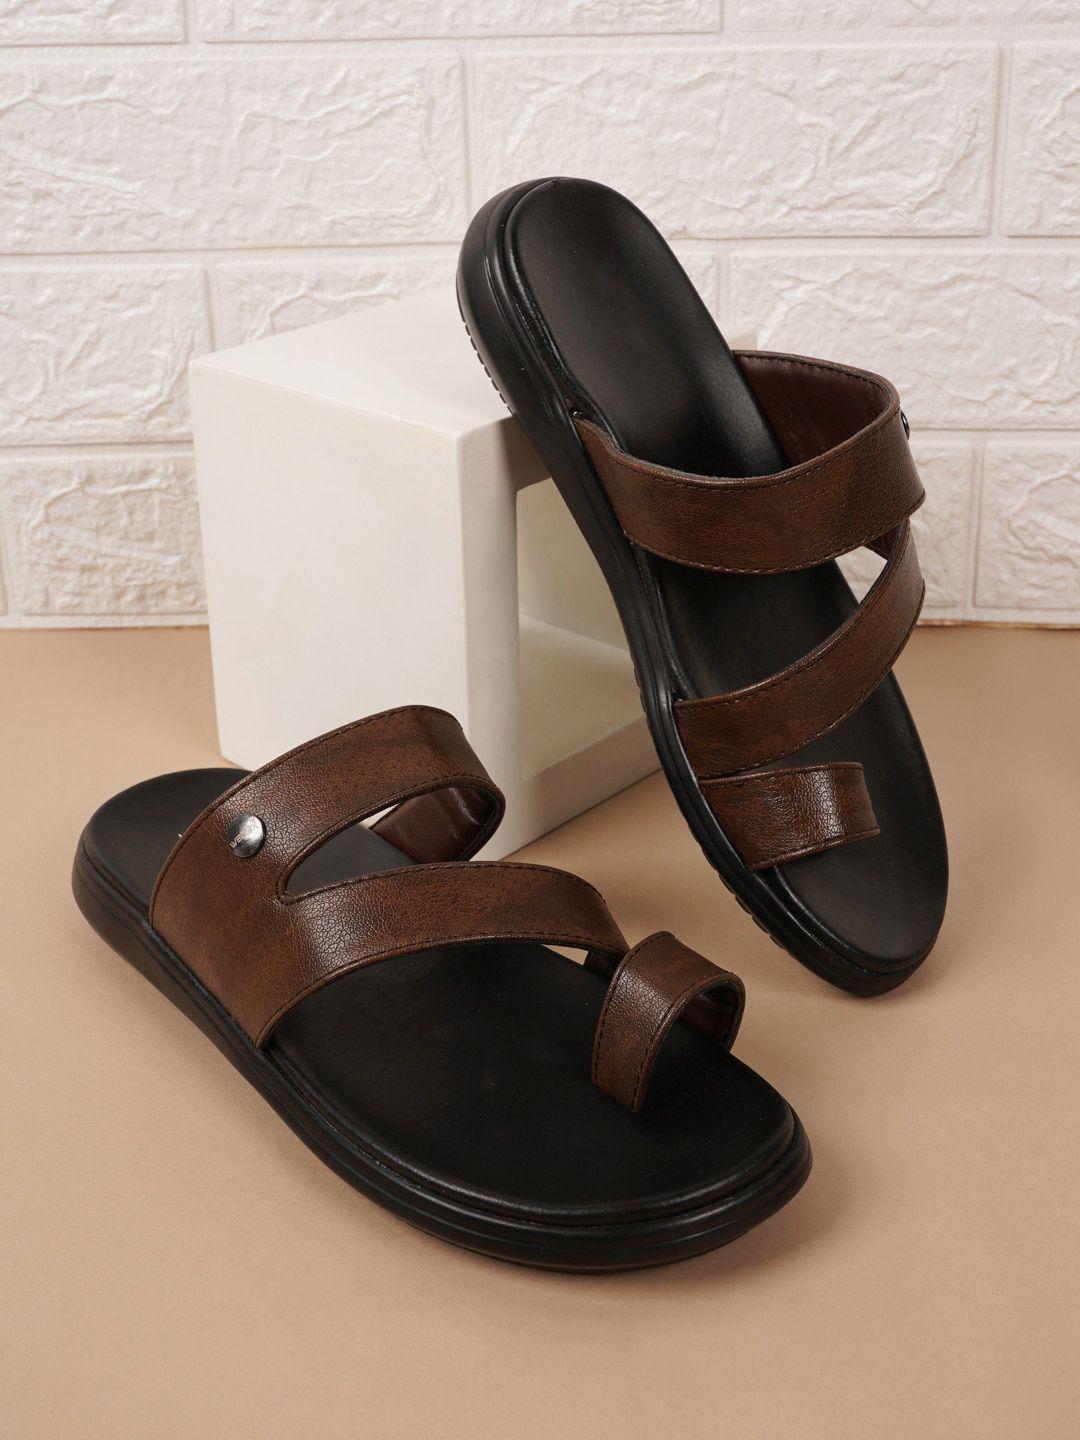 walkfree men brown one toe flats with bows